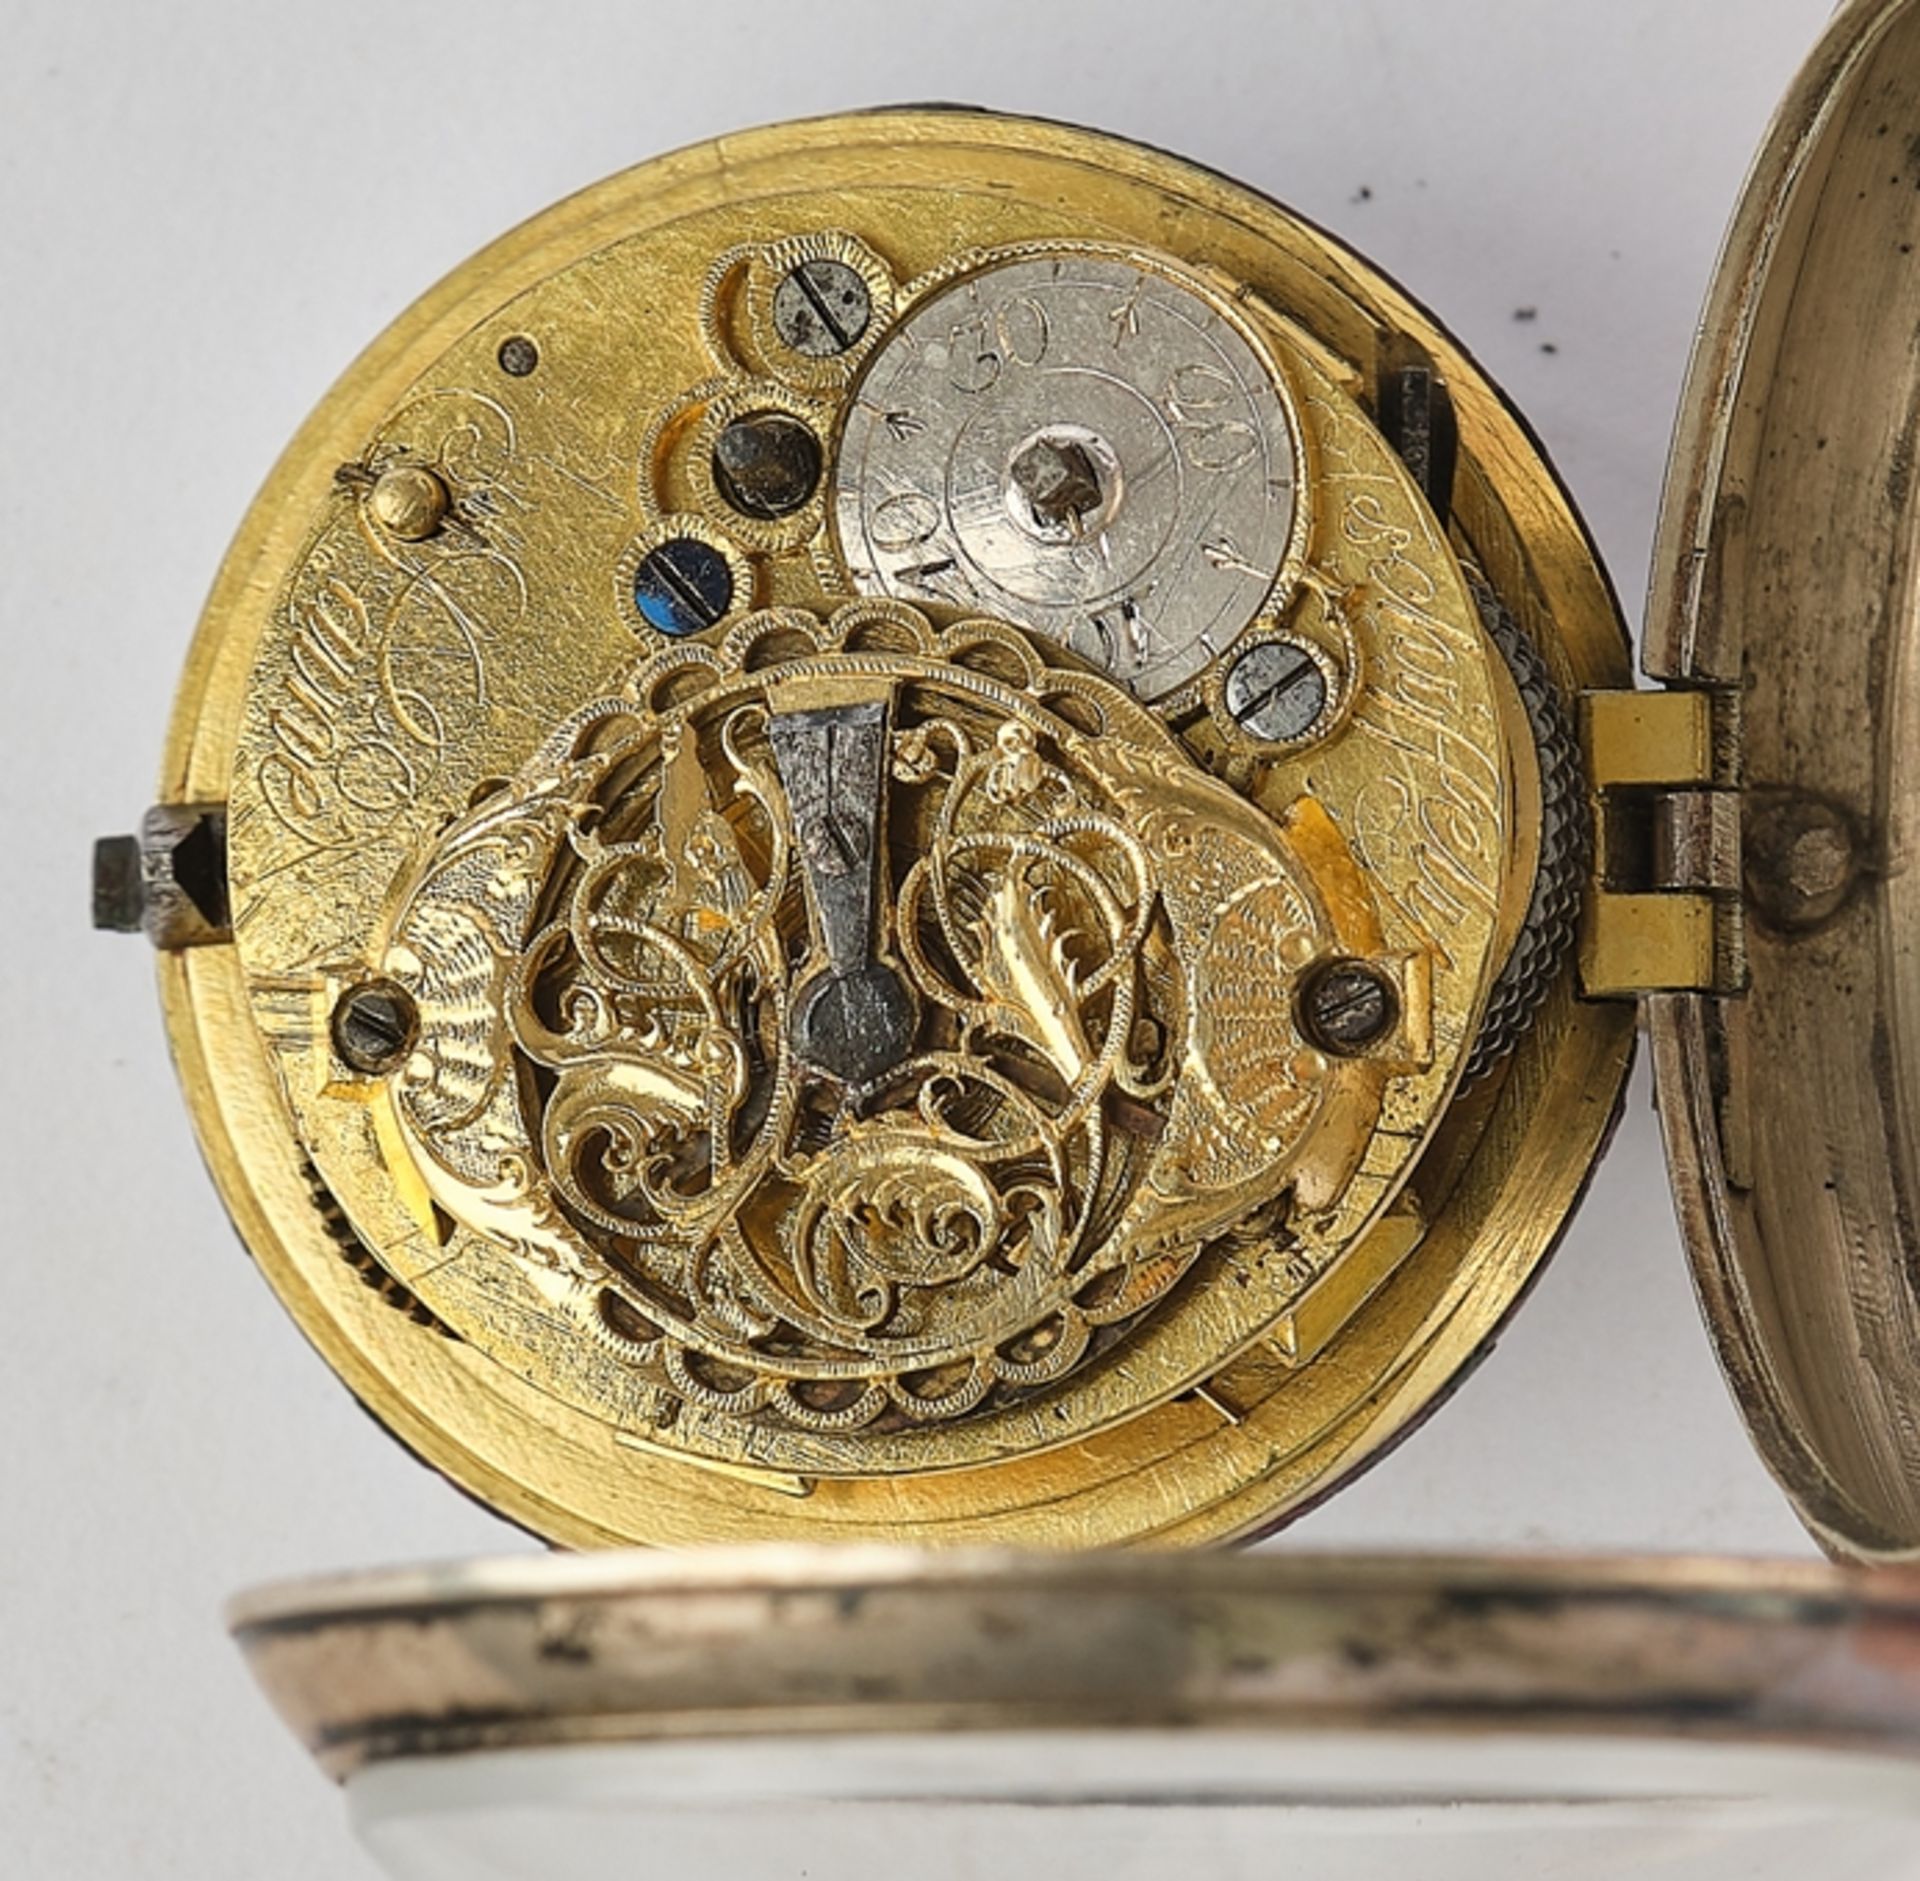 Pocket watch, Switzerland / France, 18th century, silver case, movement sign. "Tschiffely / Saine", - Image 5 of 6